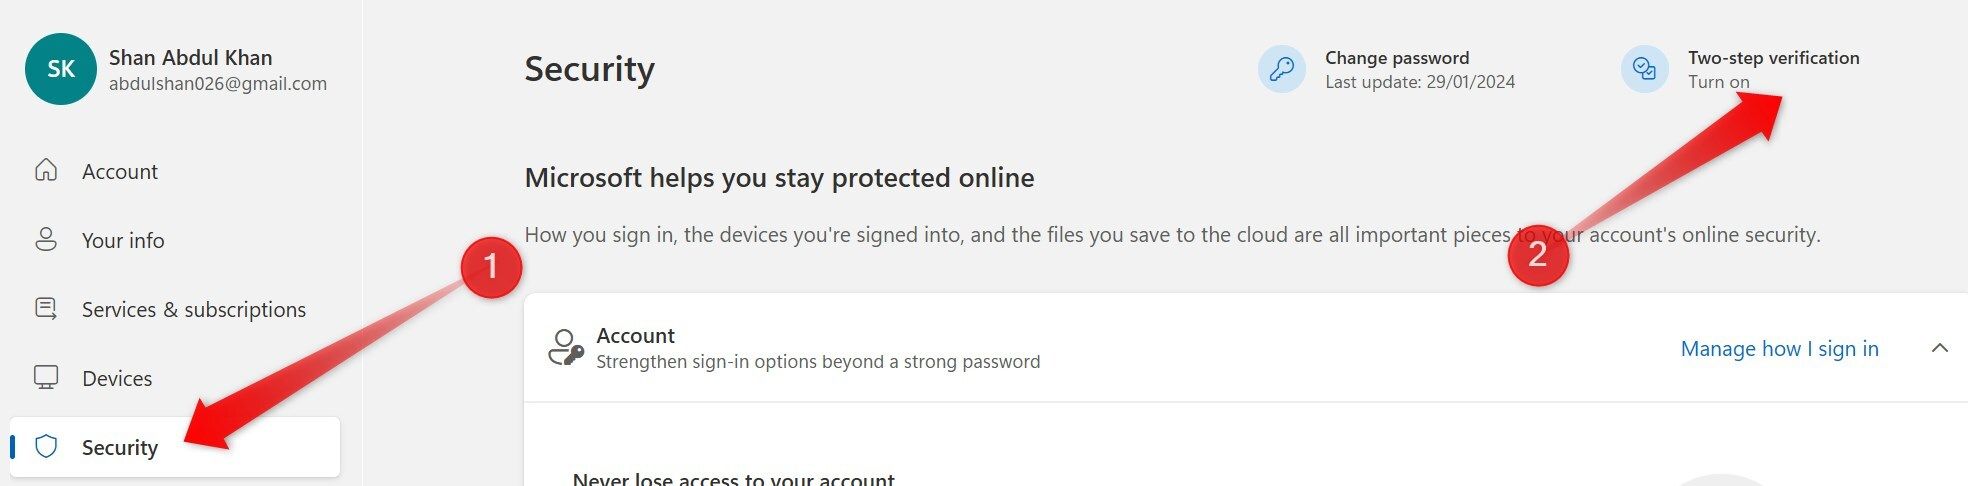 Opening the settings to setup two-step verification for Microsoft account.